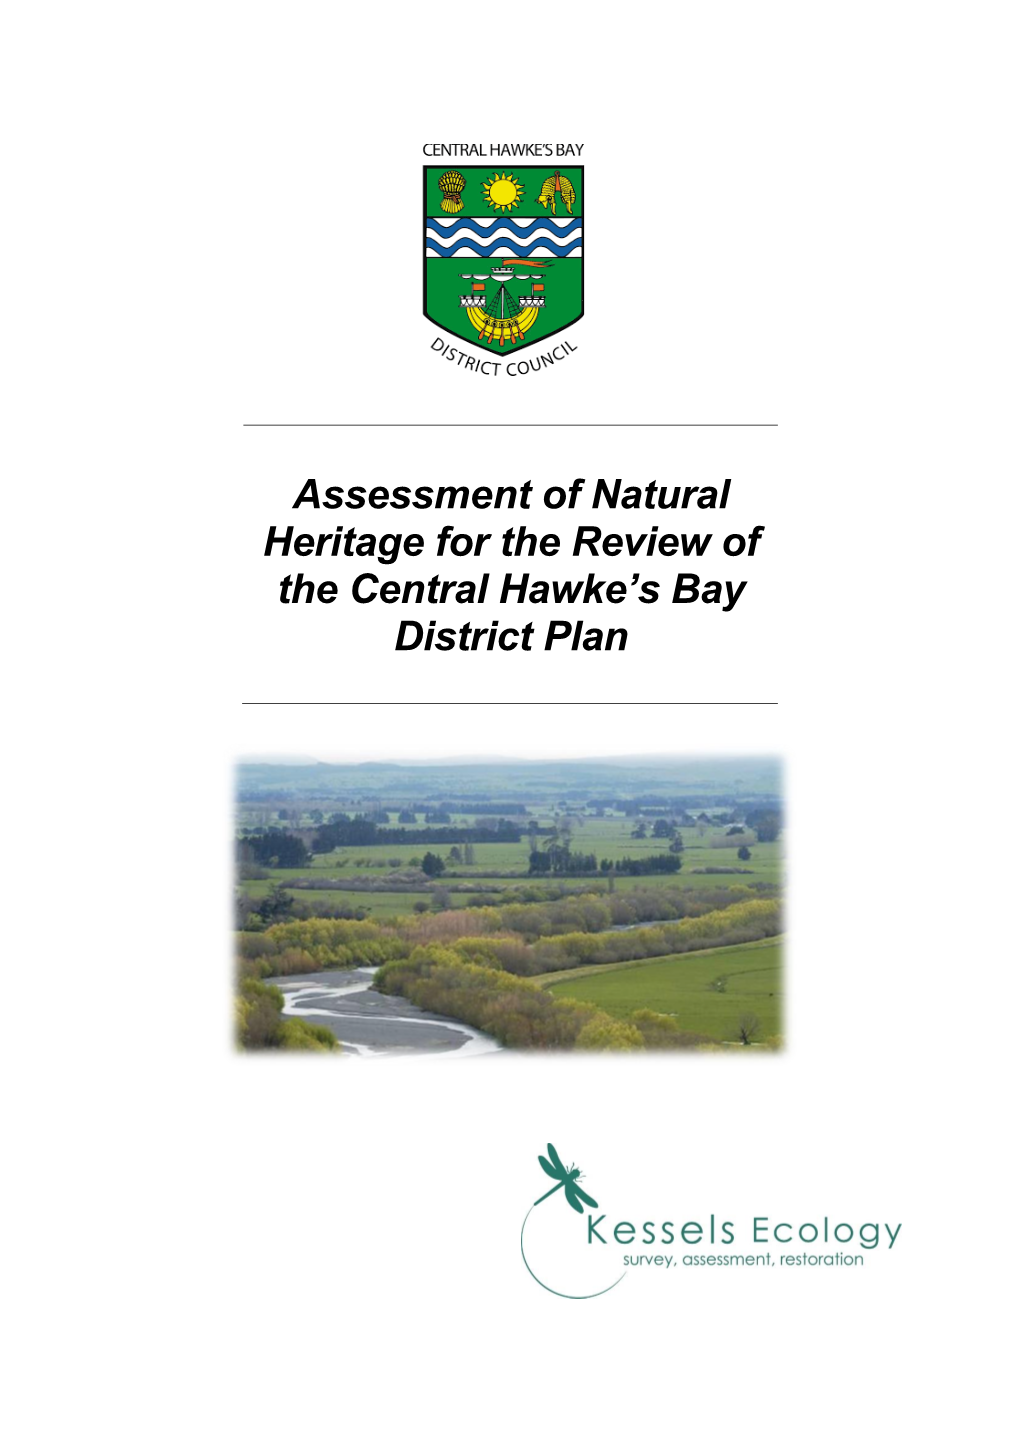 Assessment of Natural Heritage for the Review of the Central Hawke's Bay